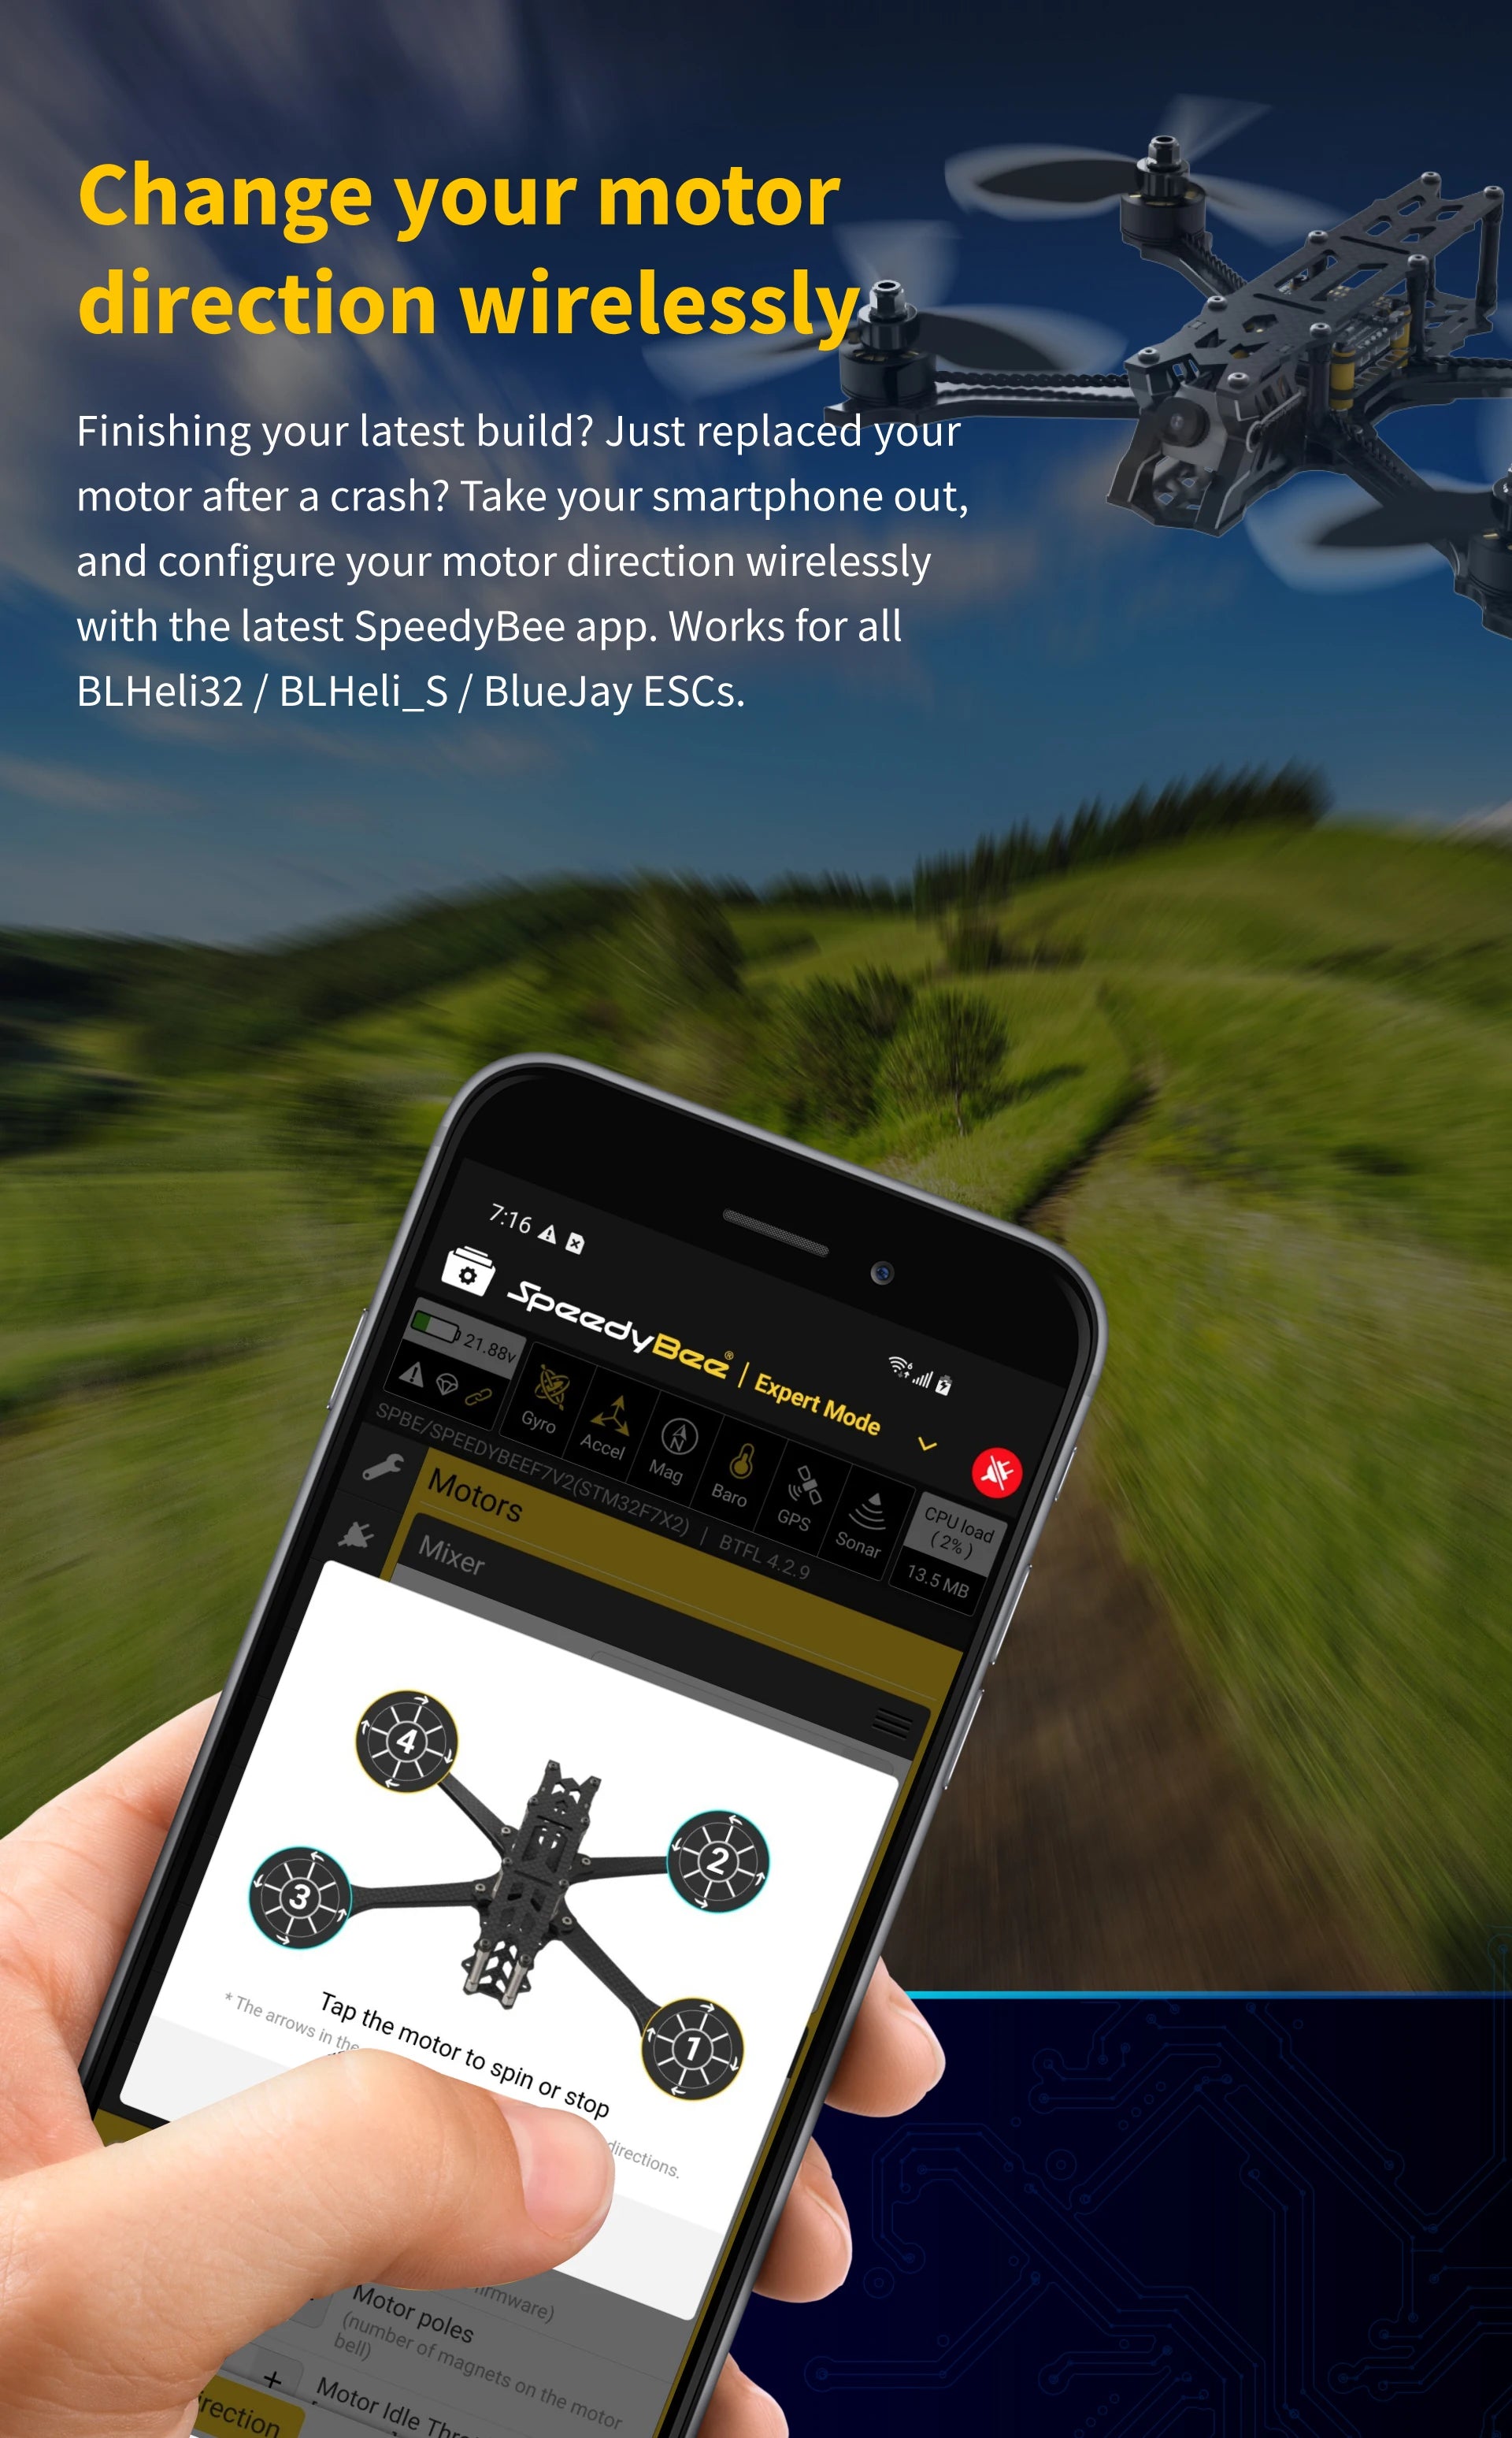 RunCam SpeedyBee F7 V3 BL32 50A 30x30 Stack, speedybee app allows you to change your motor direction wirelessly . works for all